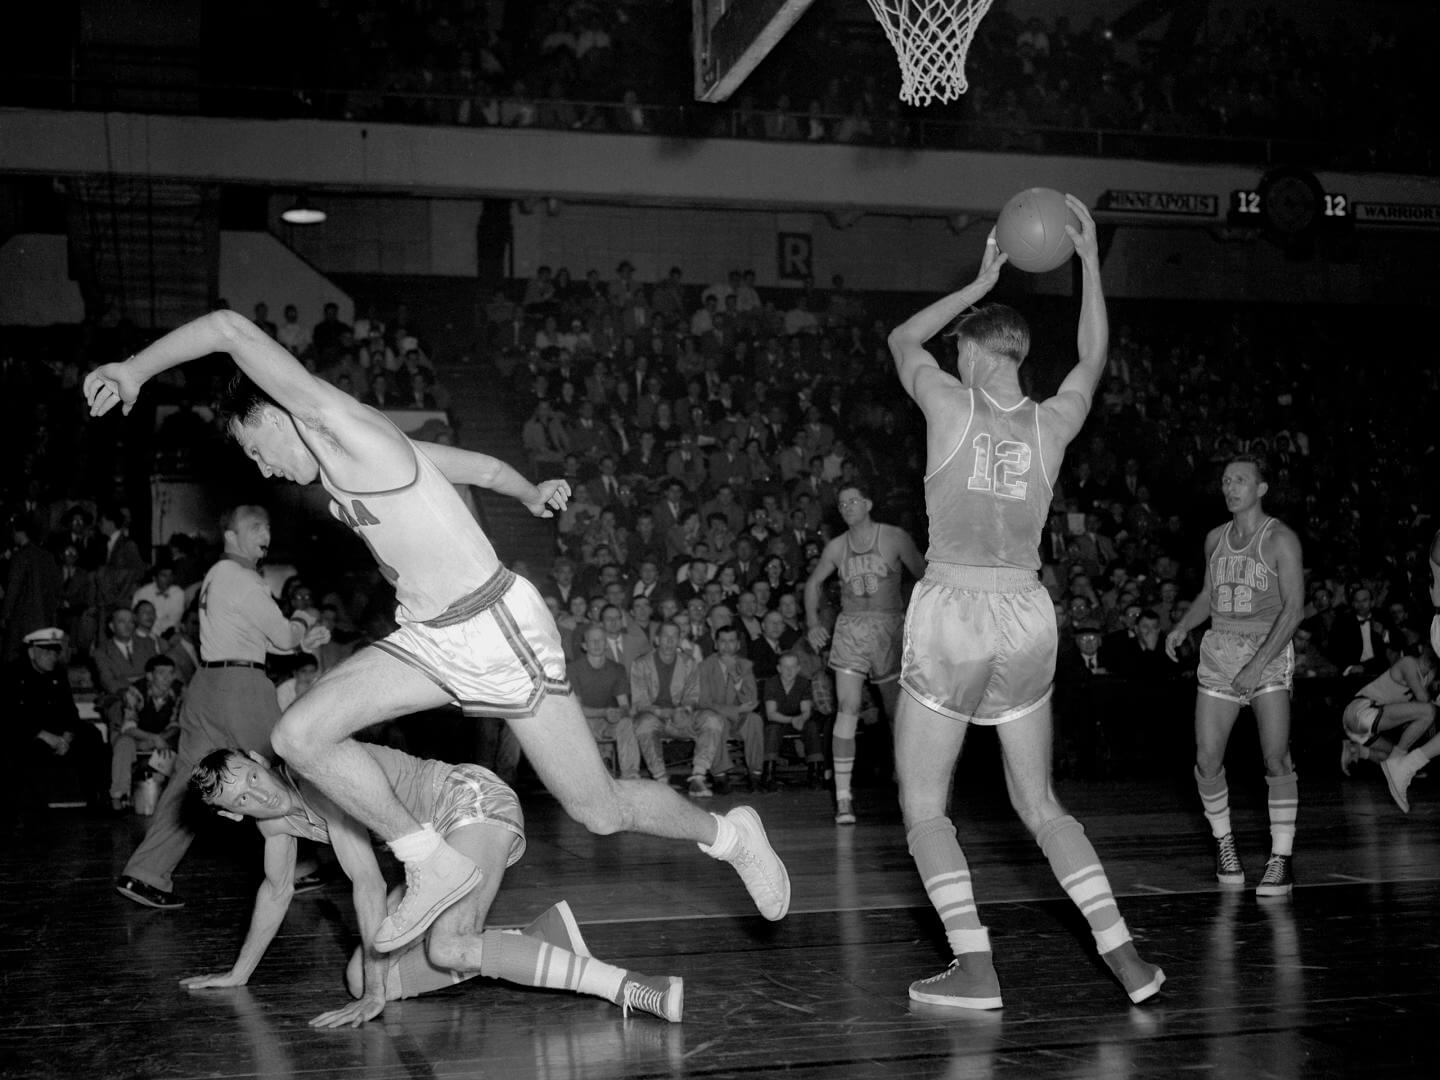 PHILADELPHIA, PA - DECEMBER 21: Howie Schultz #12 of the Minneapolis Lakers rebounds against the Philadelphia Warriors on December 21, 1951 at the Philadelphia Civic Center in Philadelphia, Pennsylvania. NOTE TO USER: User expressly acknowledges and agrees that, by downloading and or using this photograph, User is consenting to the terms and conditions of the Getty Images License Agreement. Mandatory Copyright Notice: Copyright 1951 NBAE (Photo by Charles T. Higgins/NBAE via Getty Images)